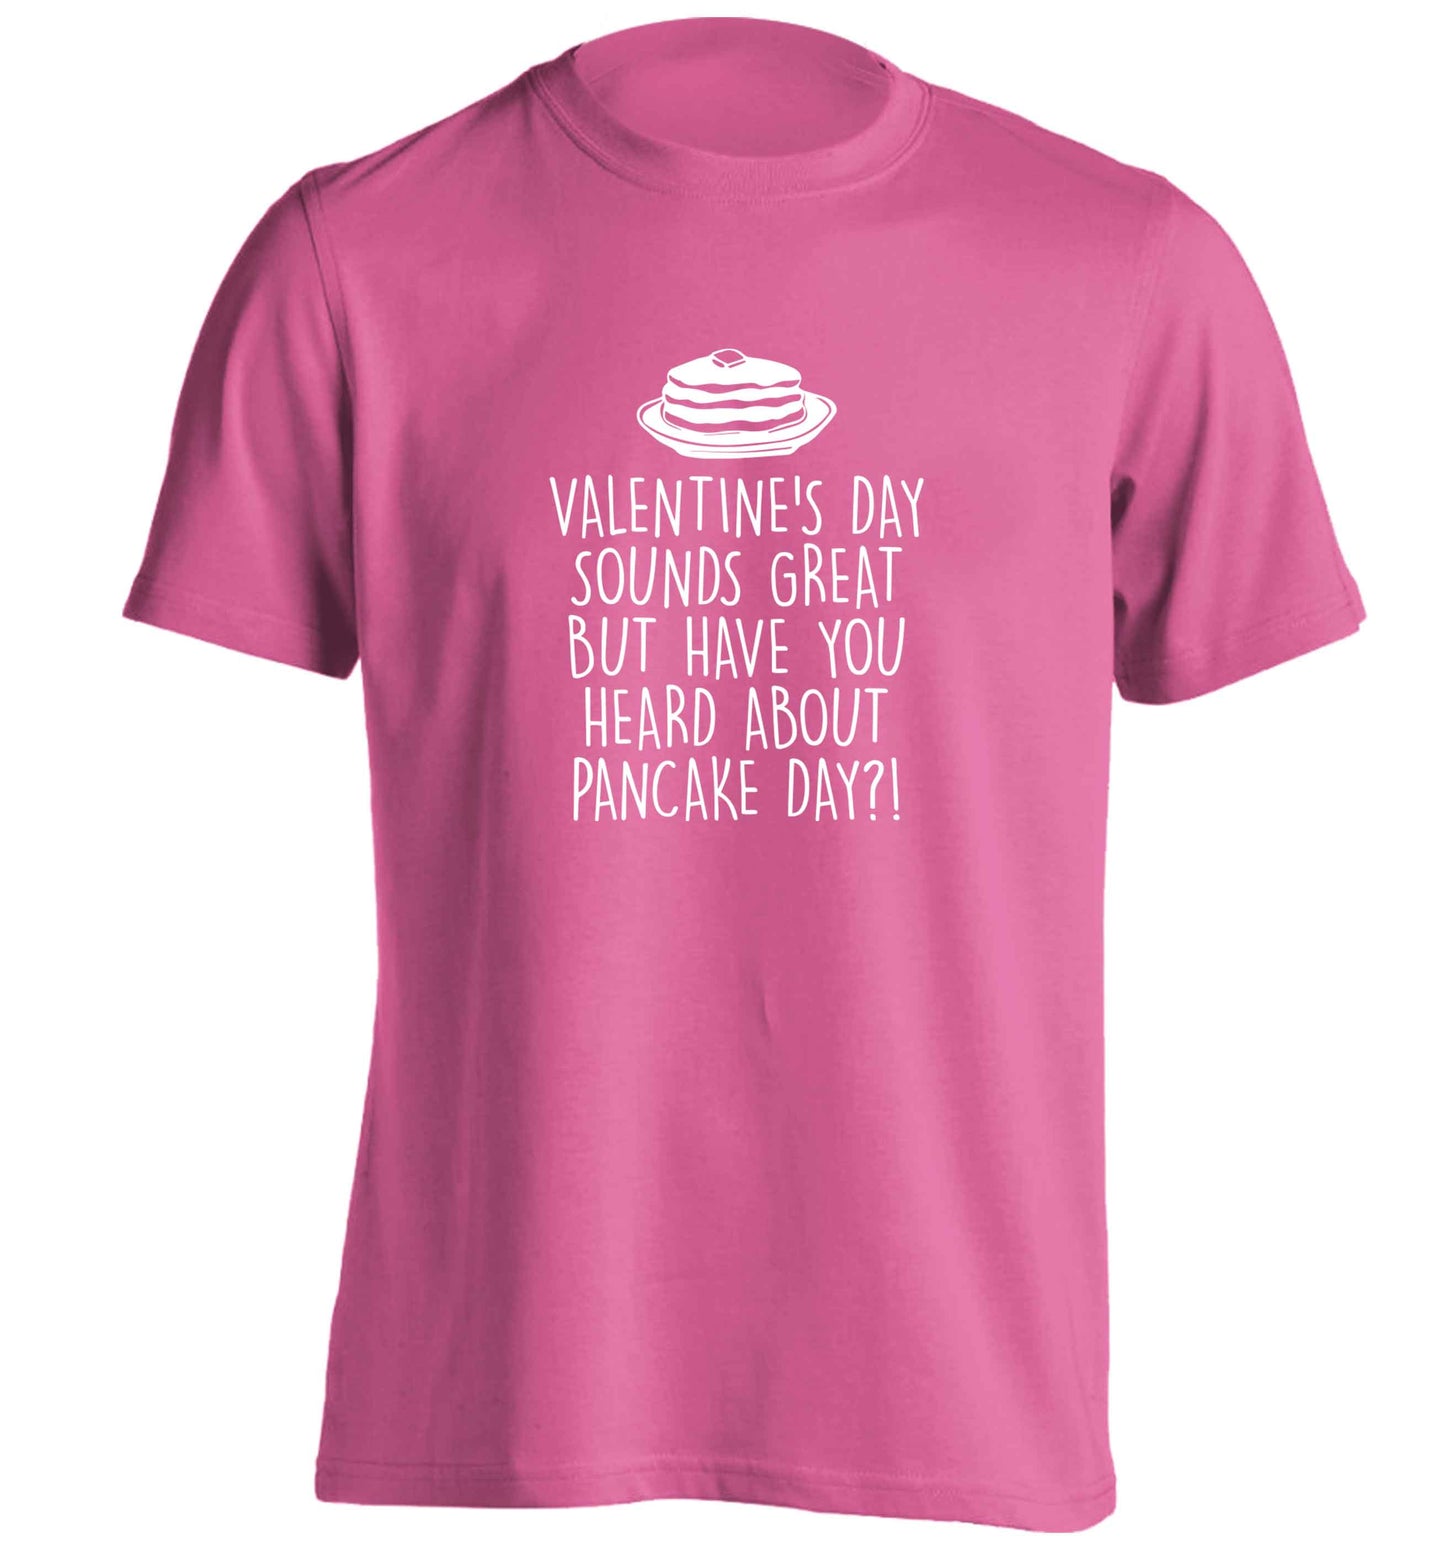 Valentine's day sounds great but have you heard about pancake day?! adults unisex pink Tshirt 2XL